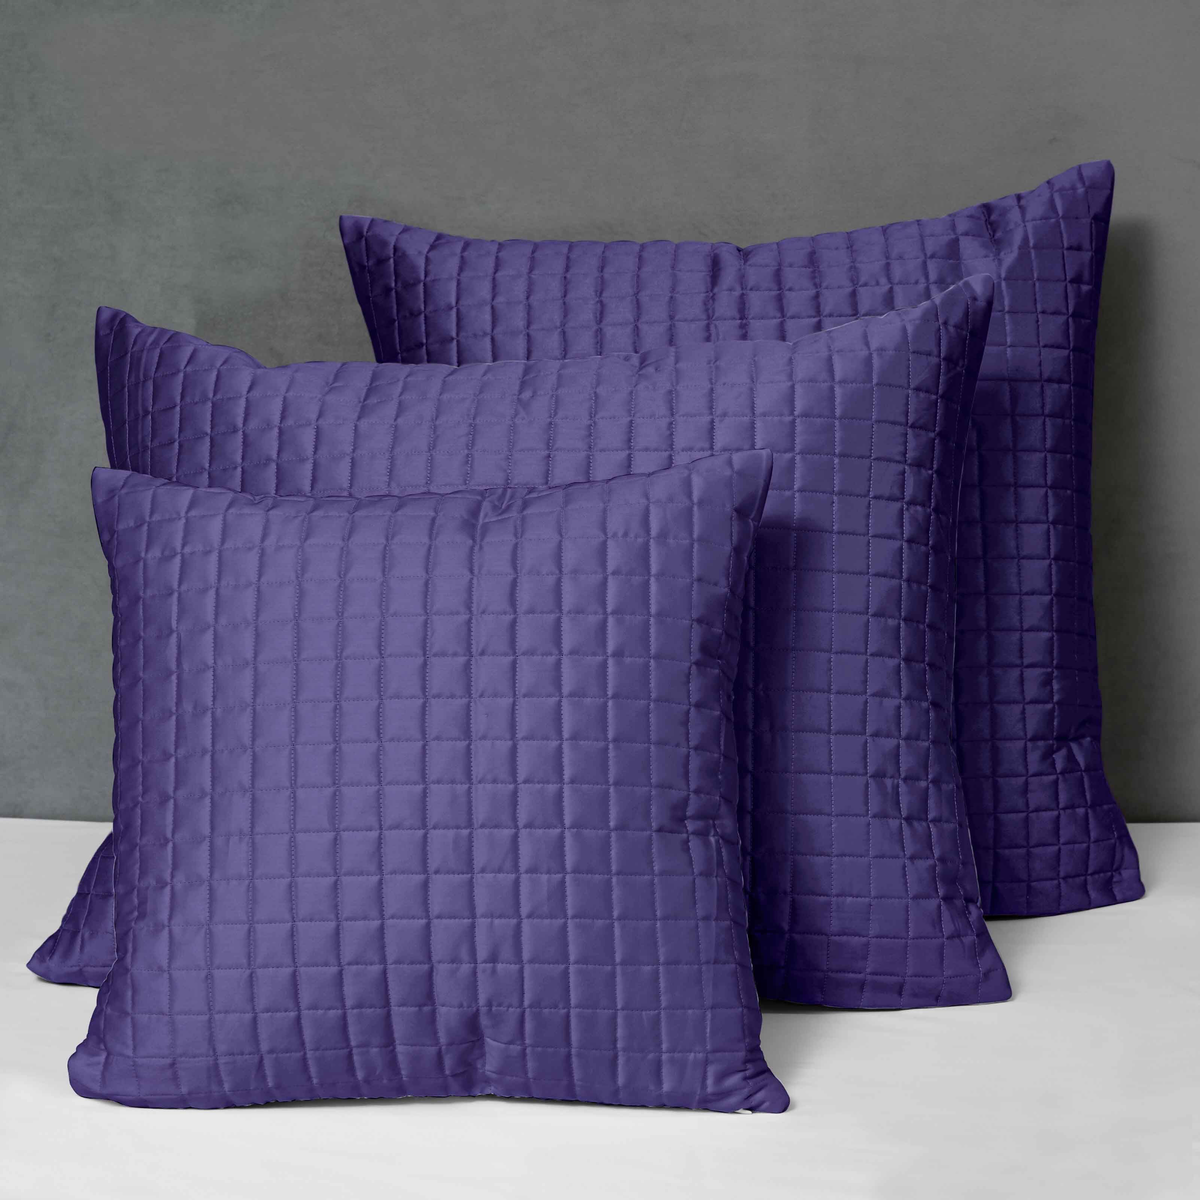 Different Sizes of Quilted Shams of Signoria Masaccio Bedding in Violet Color